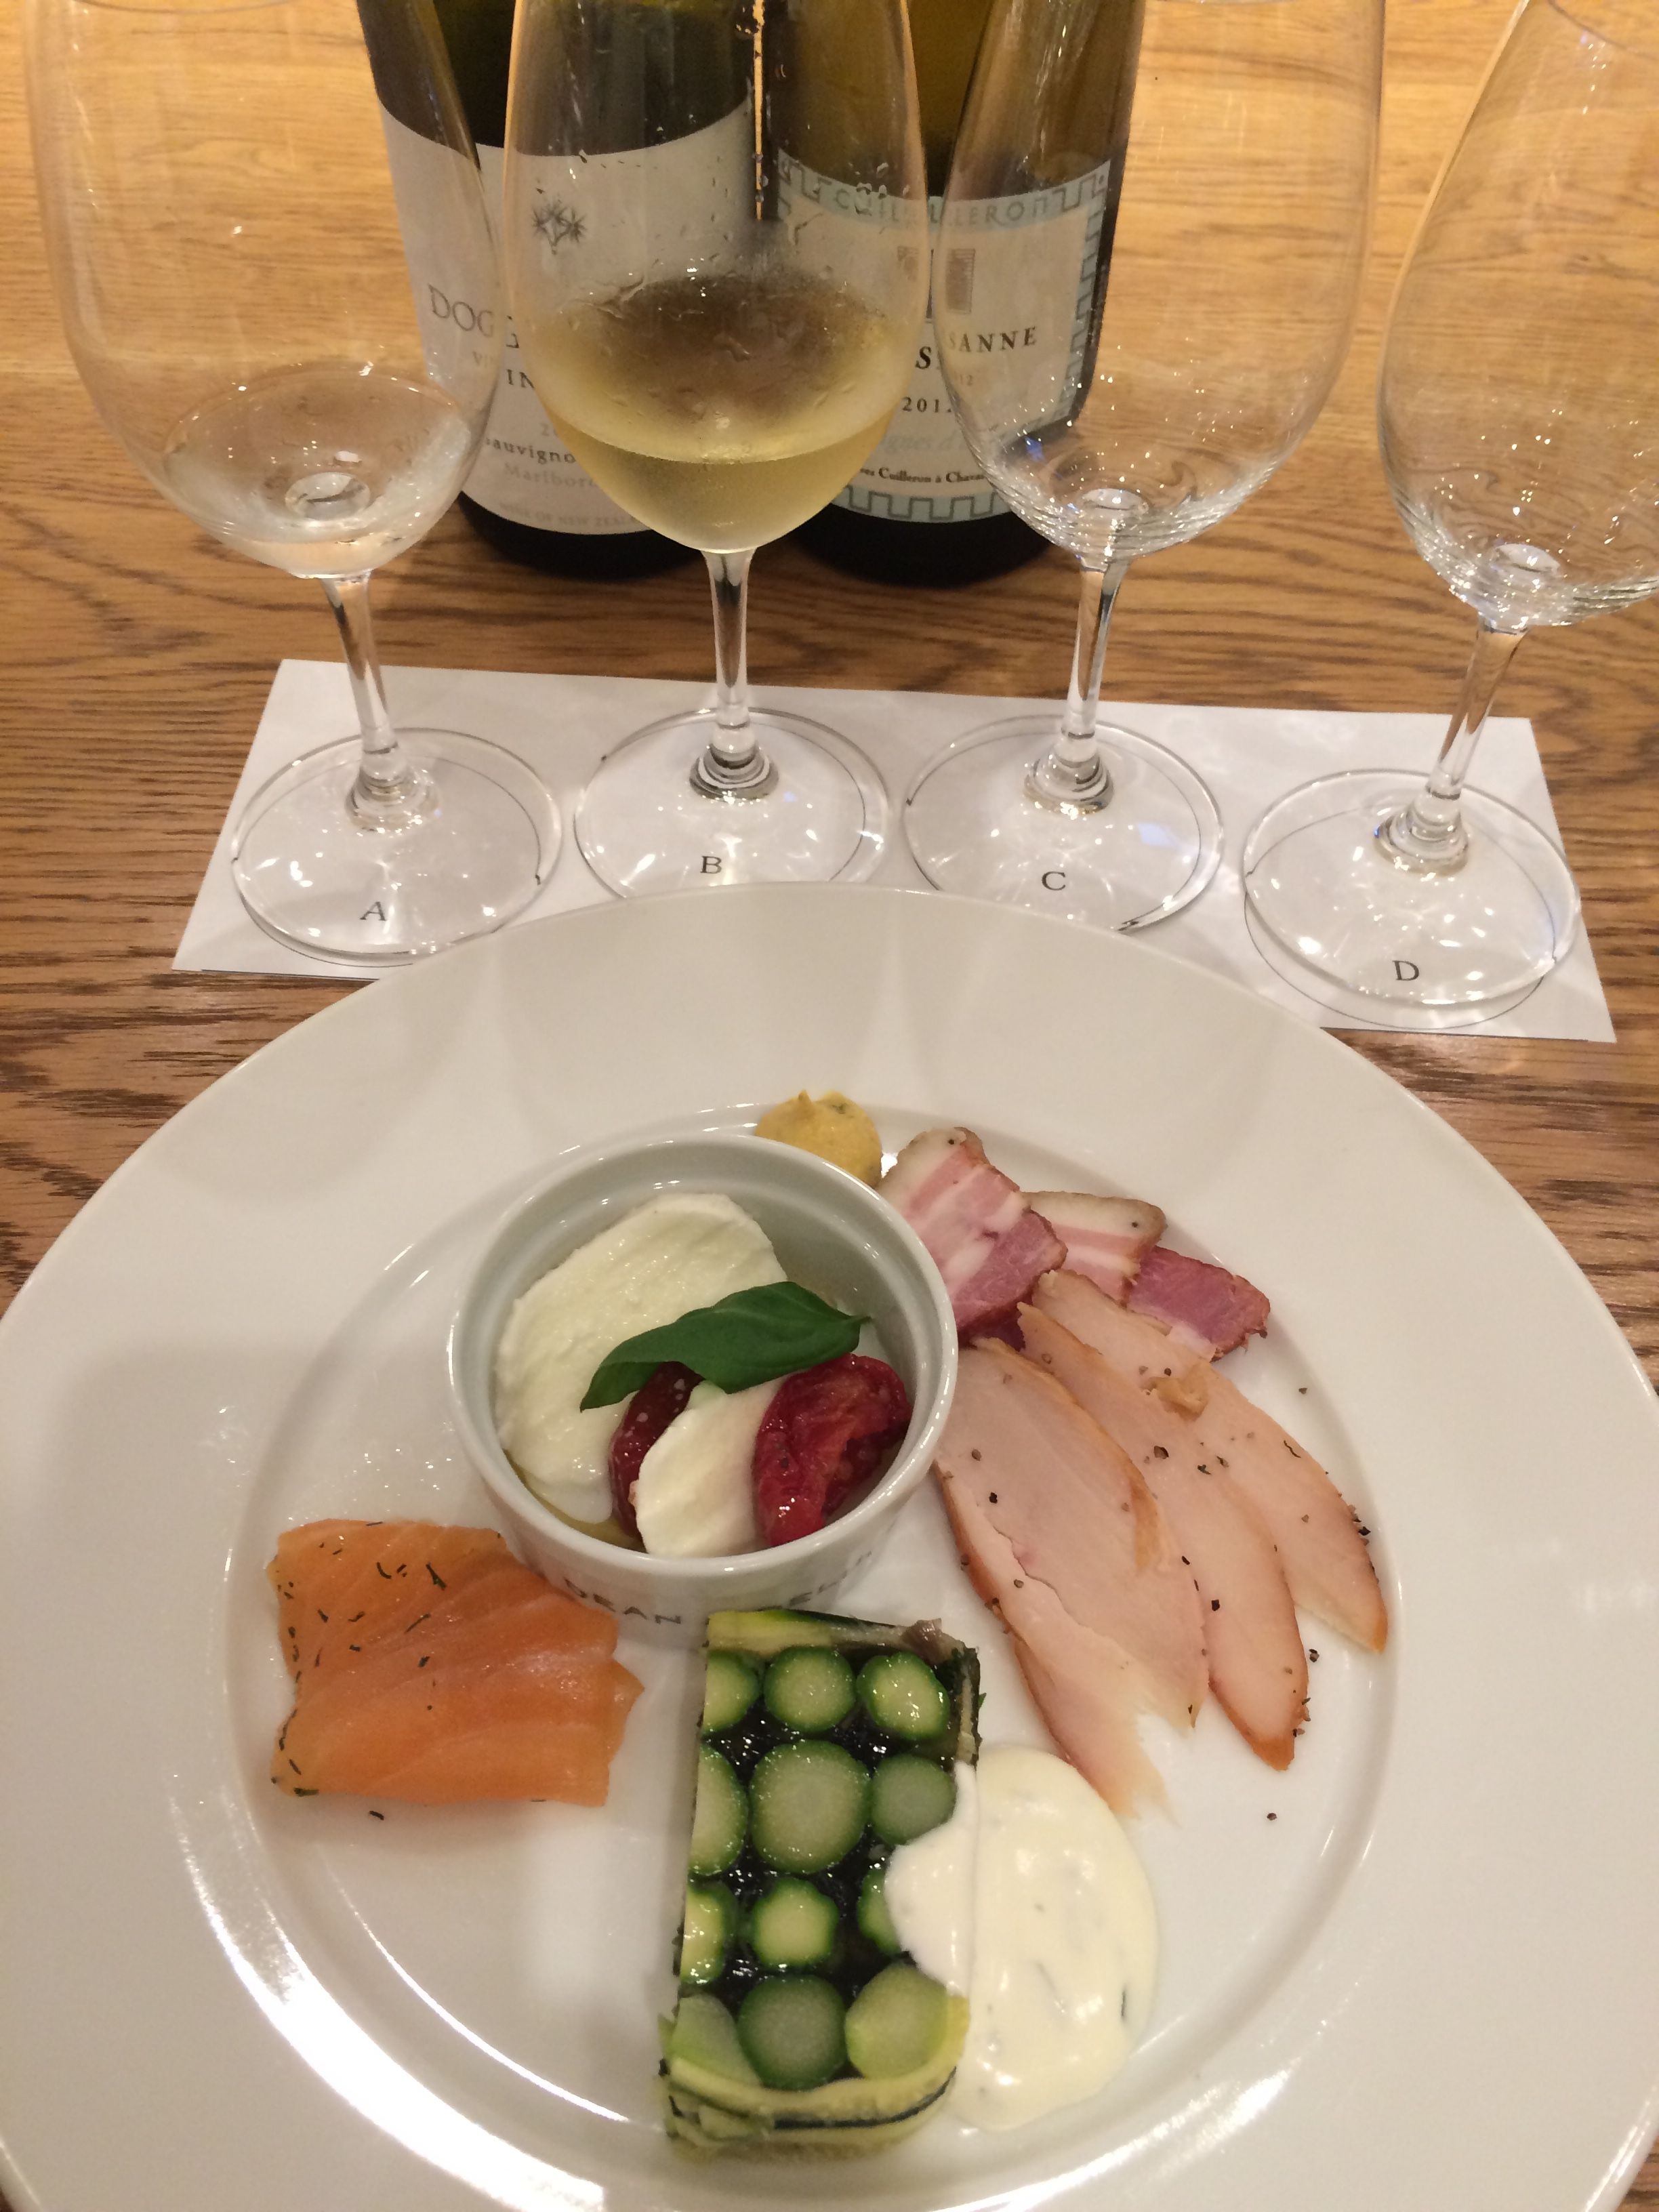 Dean Deluca Wine Experience Herbs And Wine 料理 ワイン にらやマリアージュ研究室